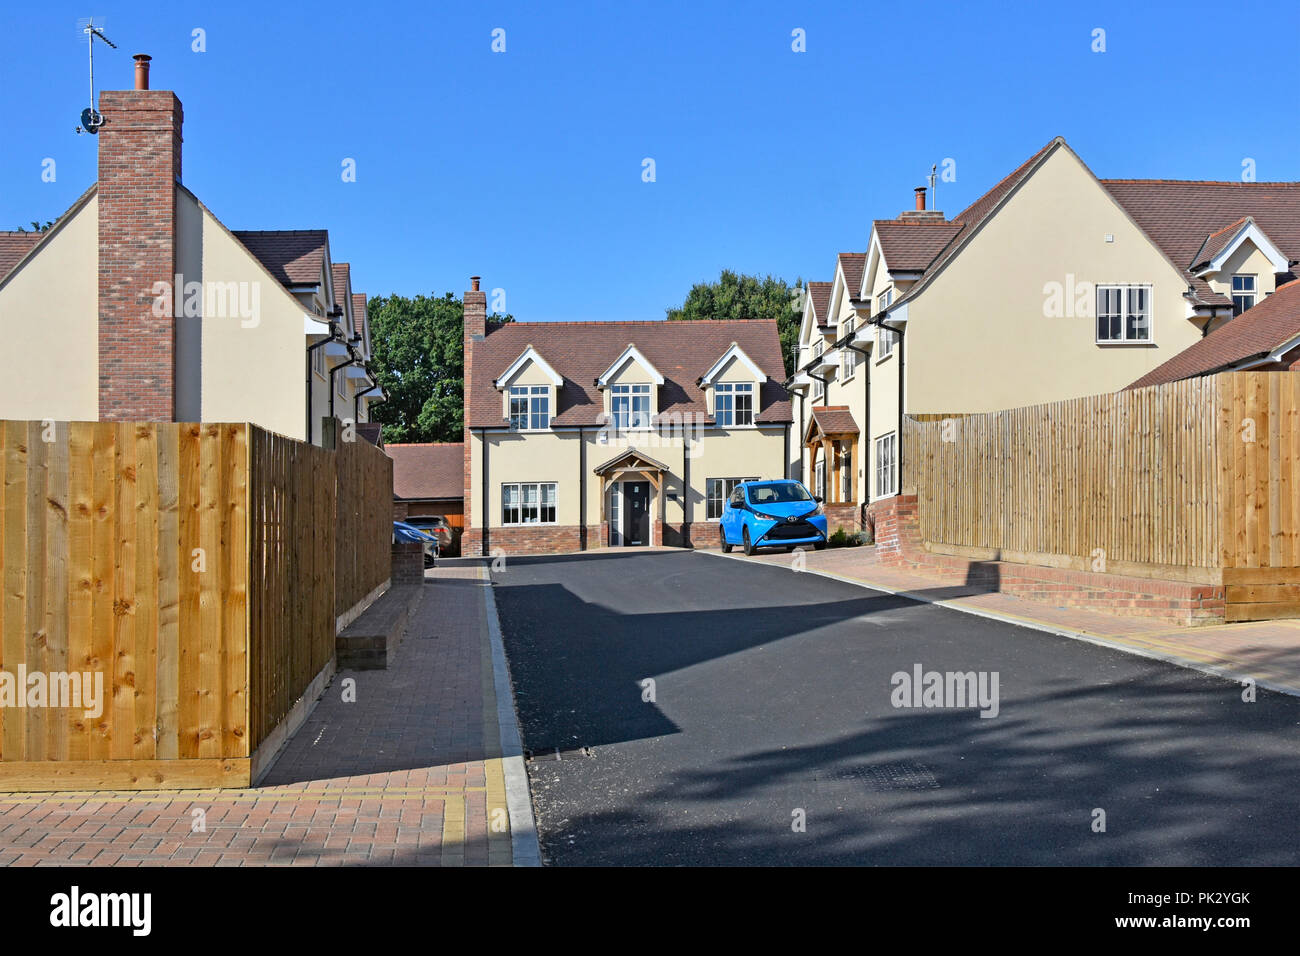 New home in housing property development mixed types real estate with tarmac service road garden fence & car parking space Essex England UK Stock Photo